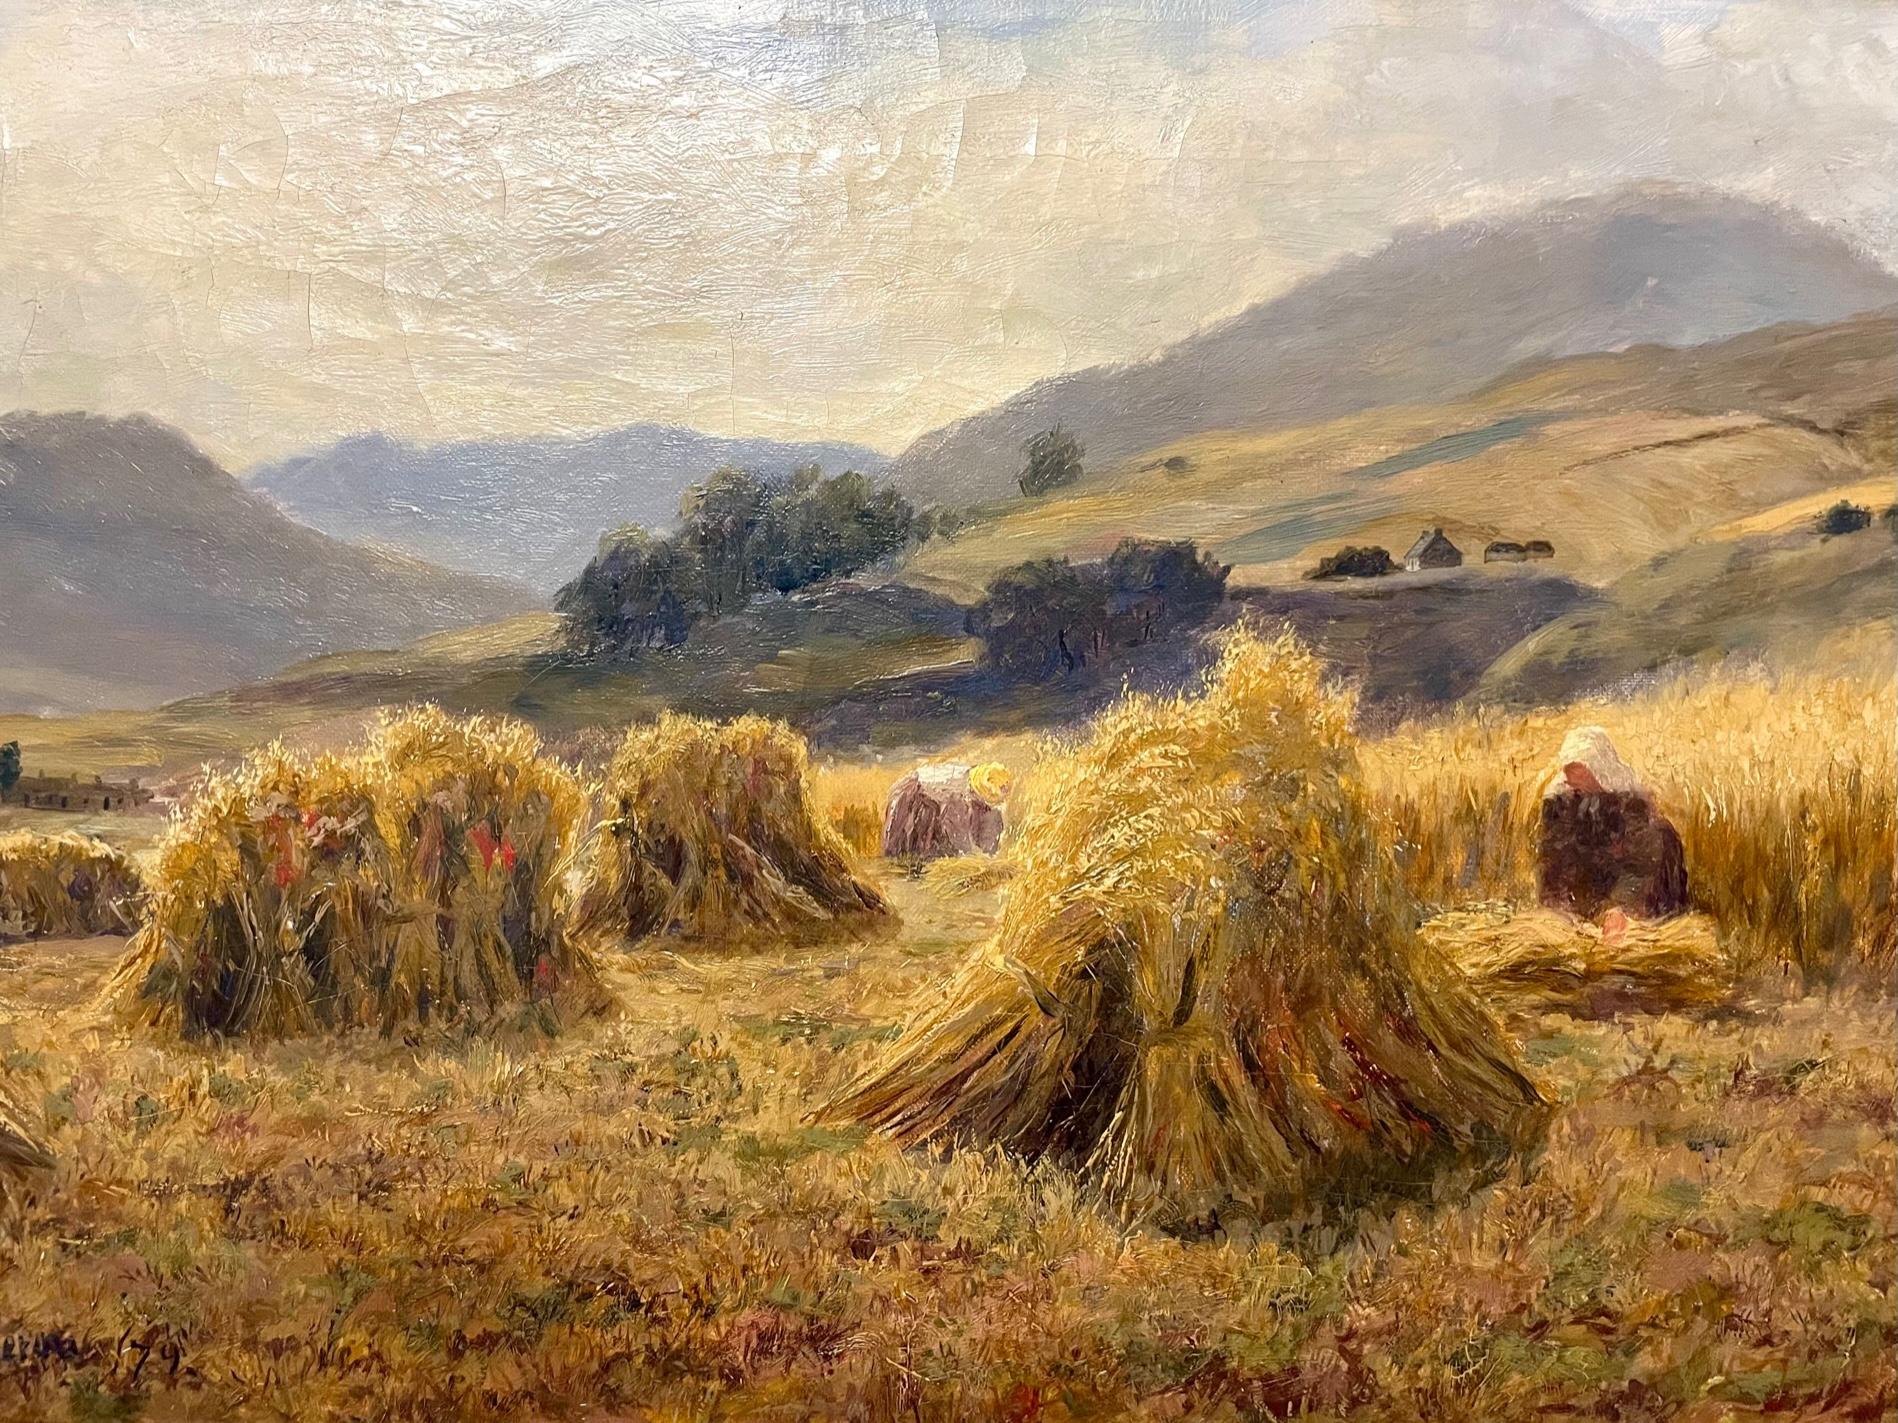 Haystacks in the Highlands - Naturalistic Painting by Duncan Cameron